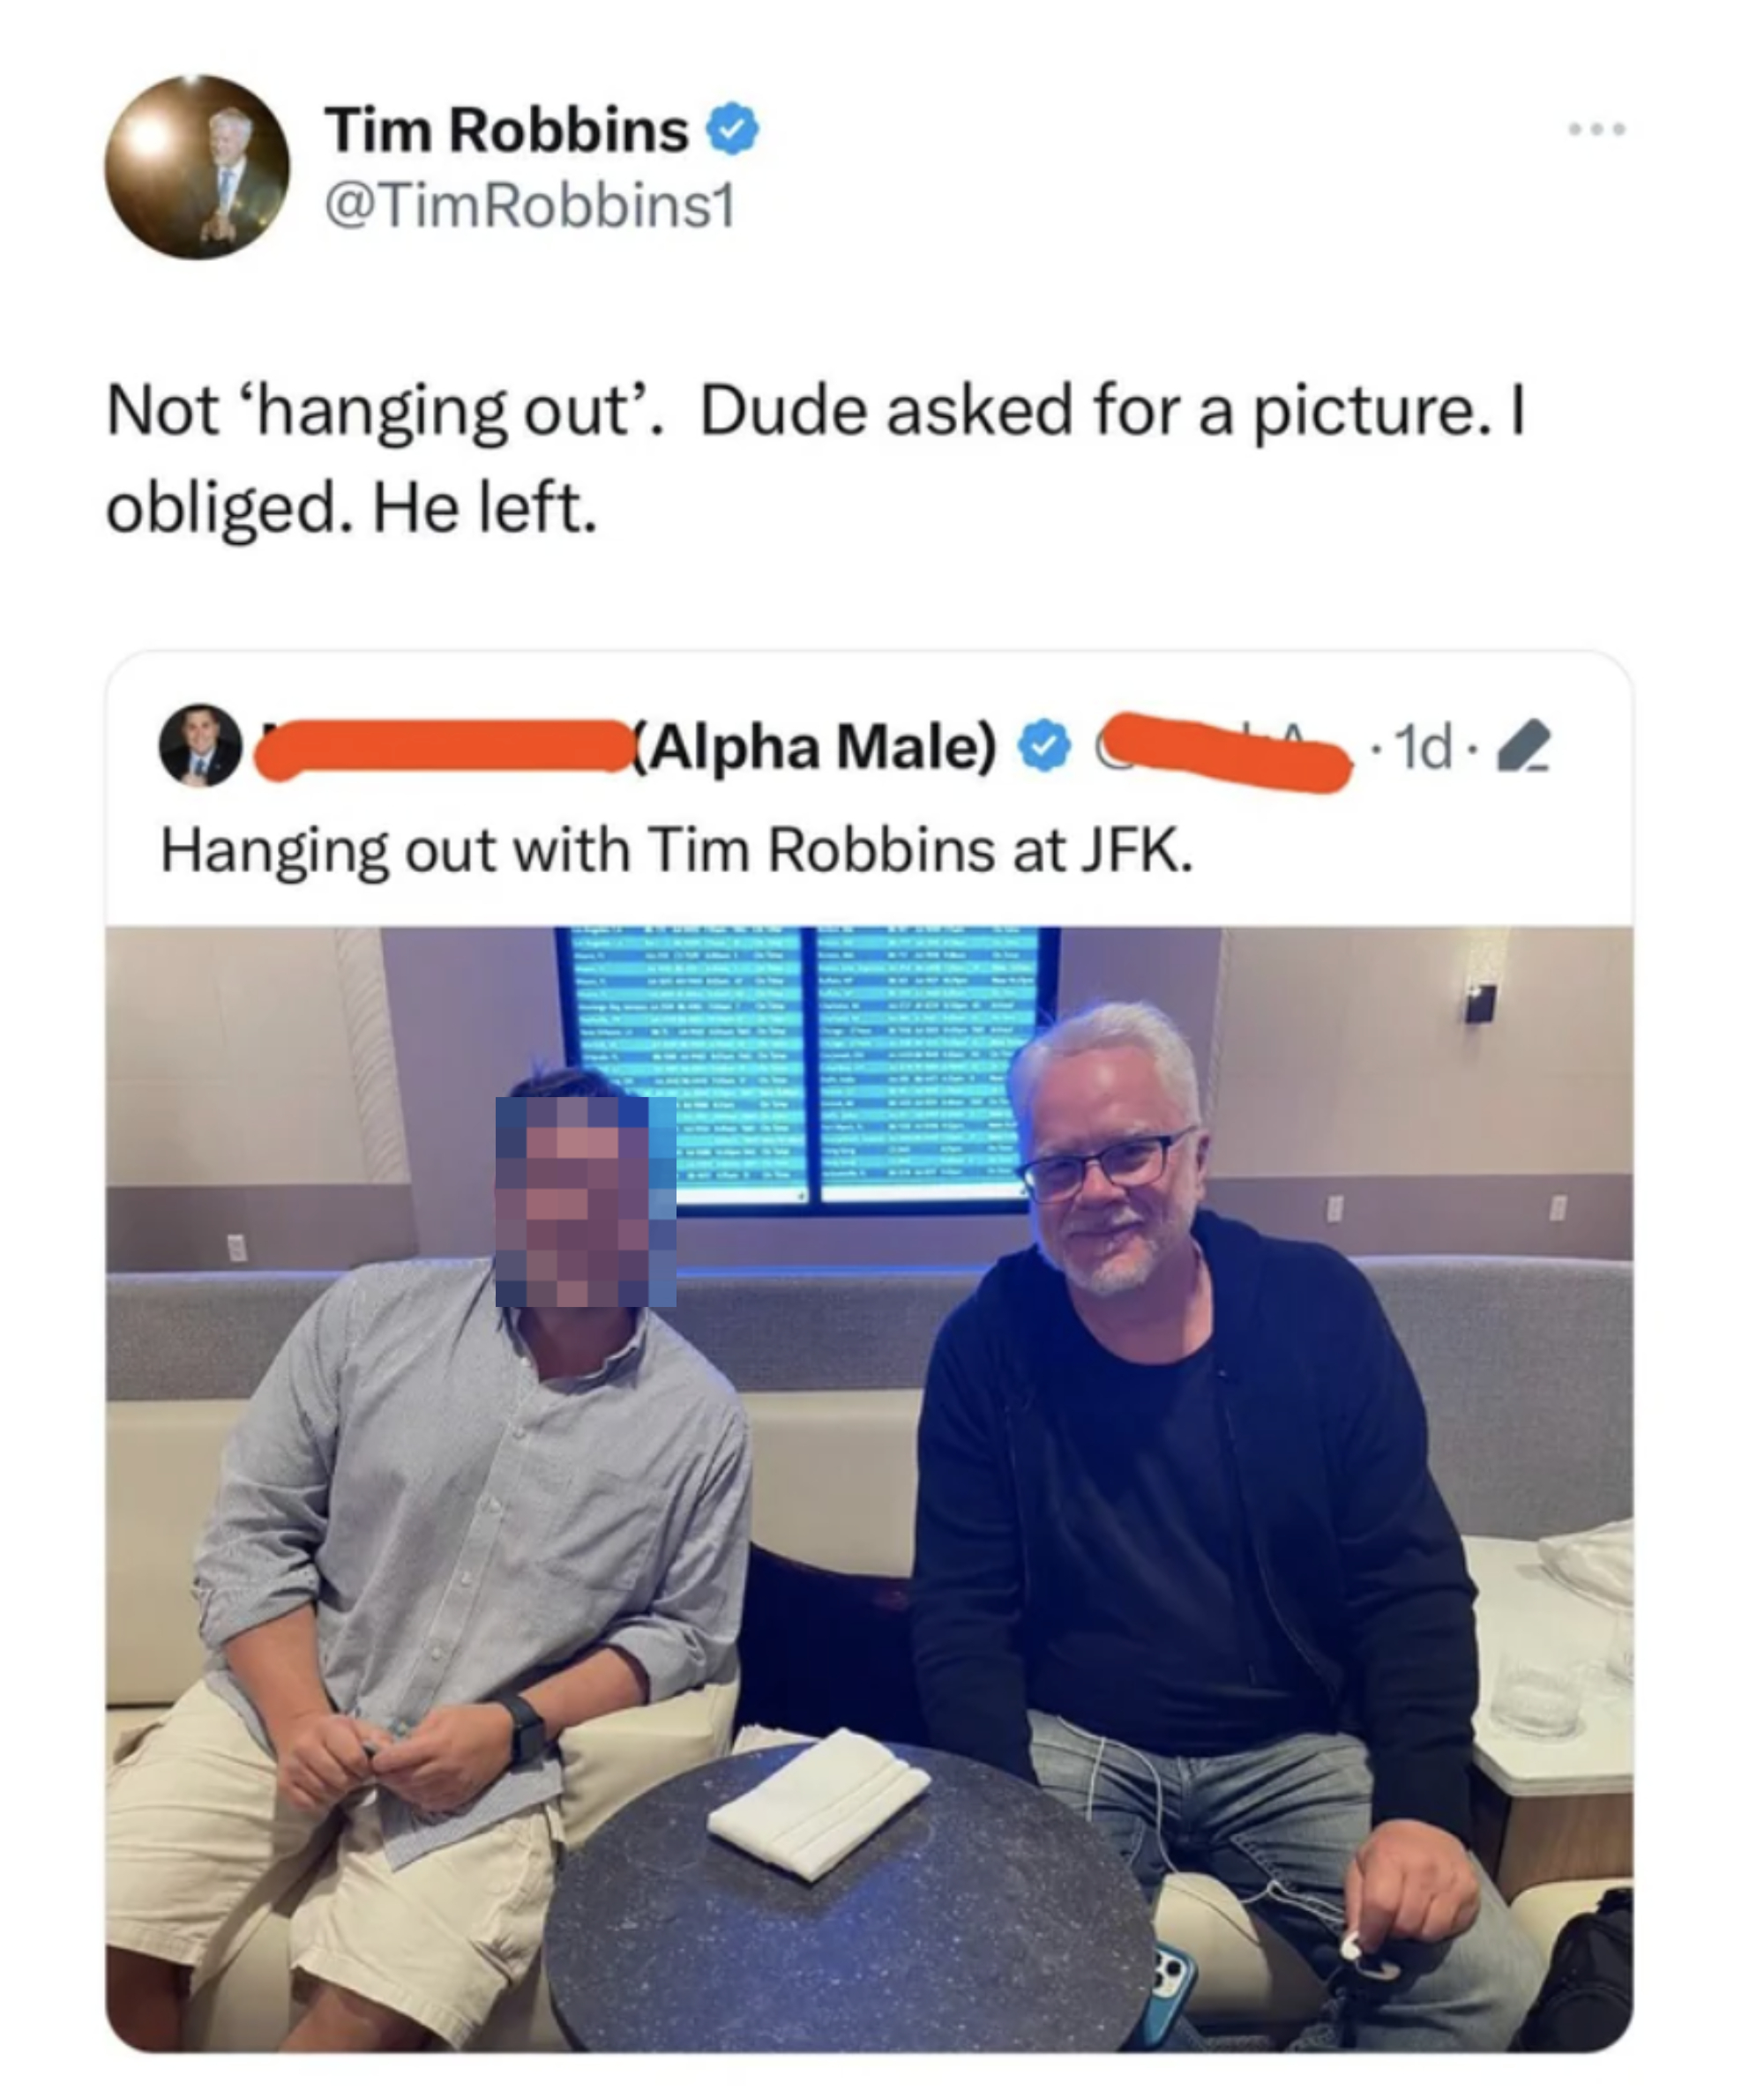 Tim Robbins and a fan seated together, smiling for a photo. Robbins is mentioned as an &quot;Alpha Male&quot; in the overlaid tweet